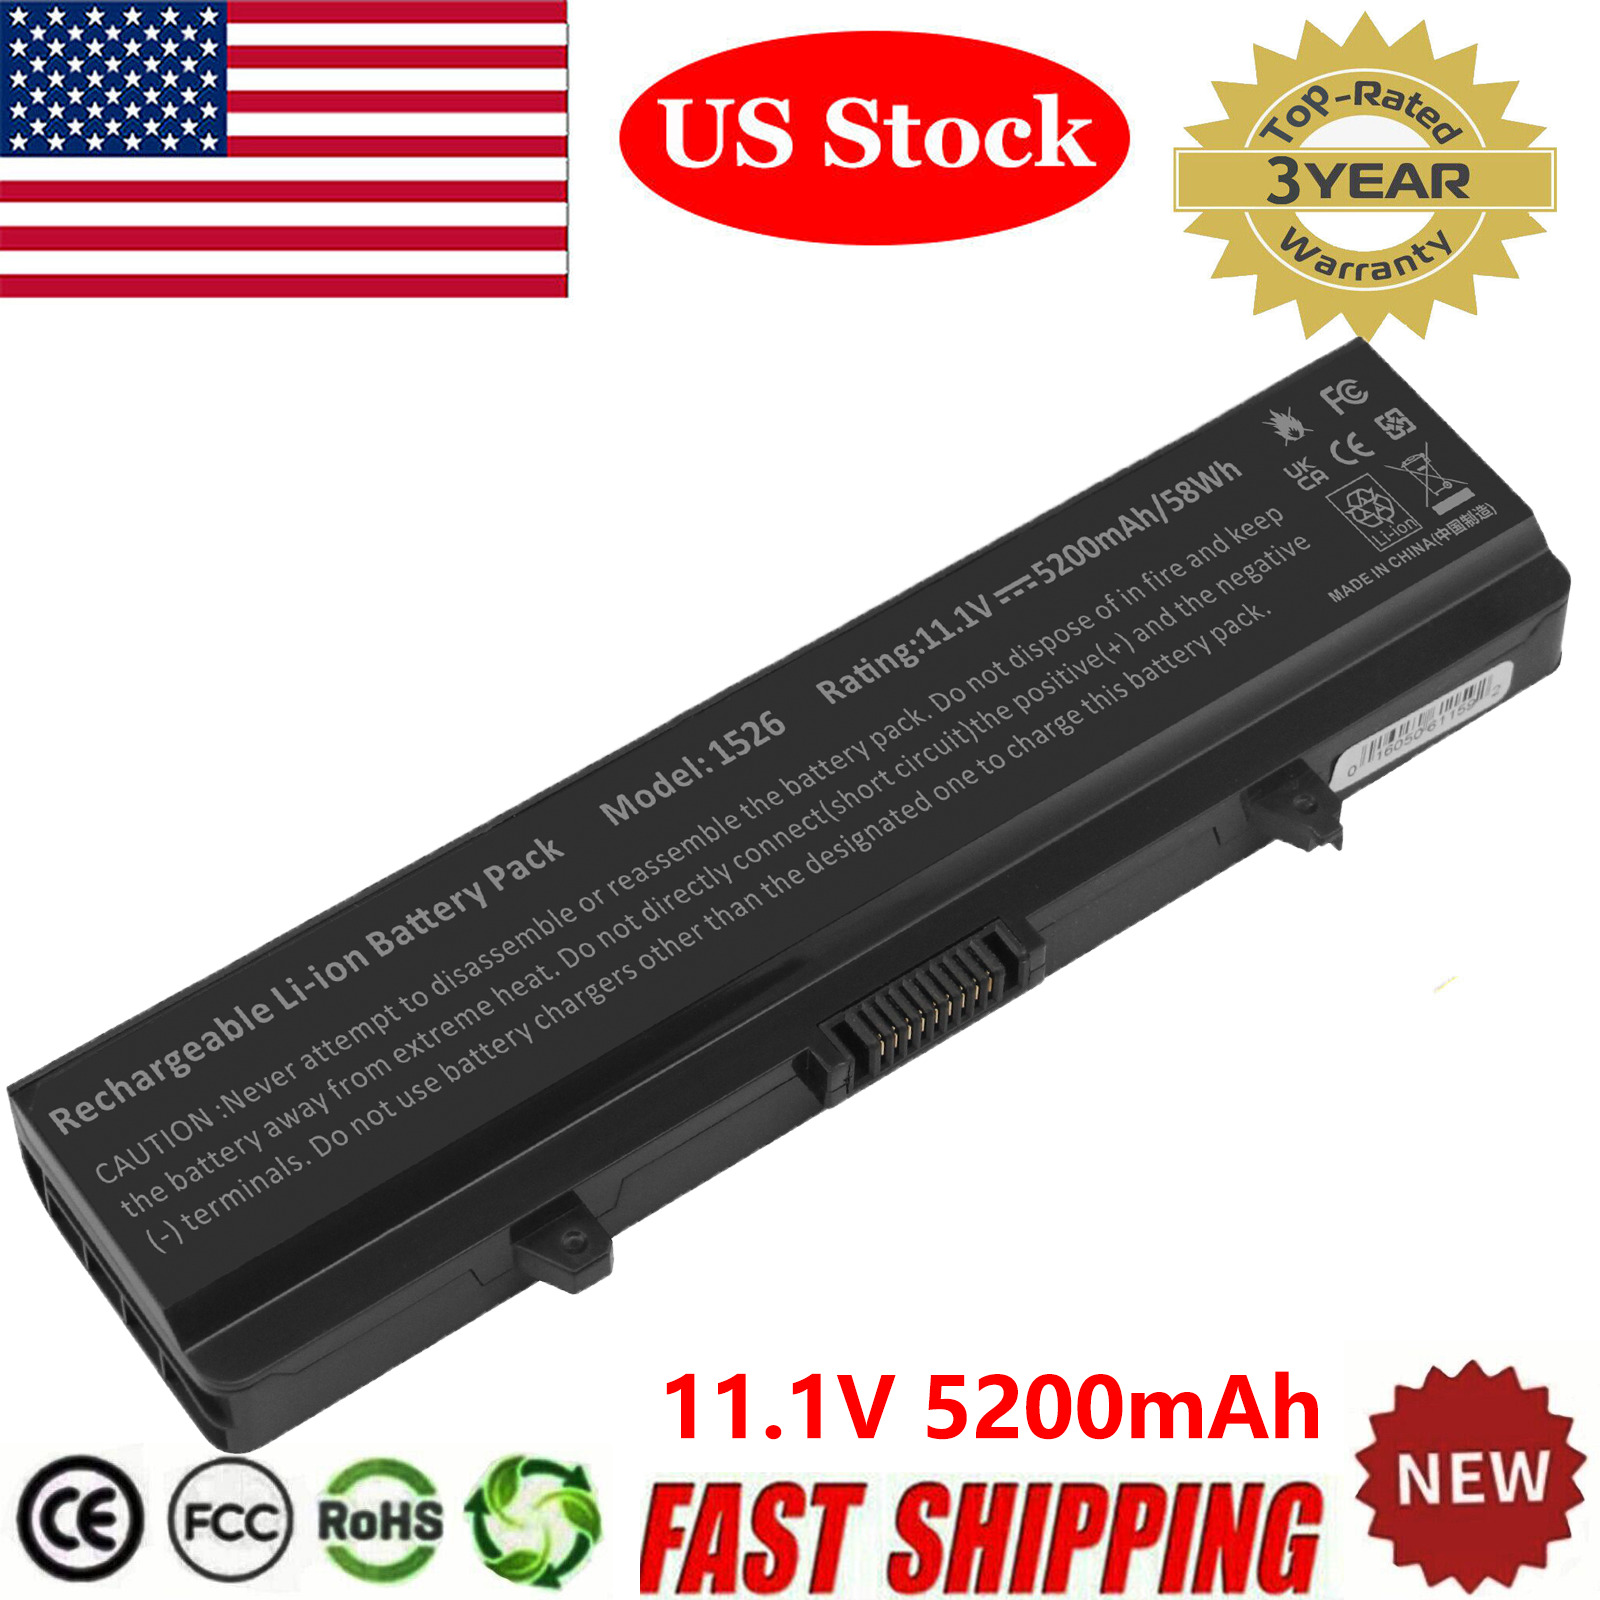 Battery for Dell Inspiron 1525 1526 1545 1546 GW240 RN873 X284G M911G HP297 US